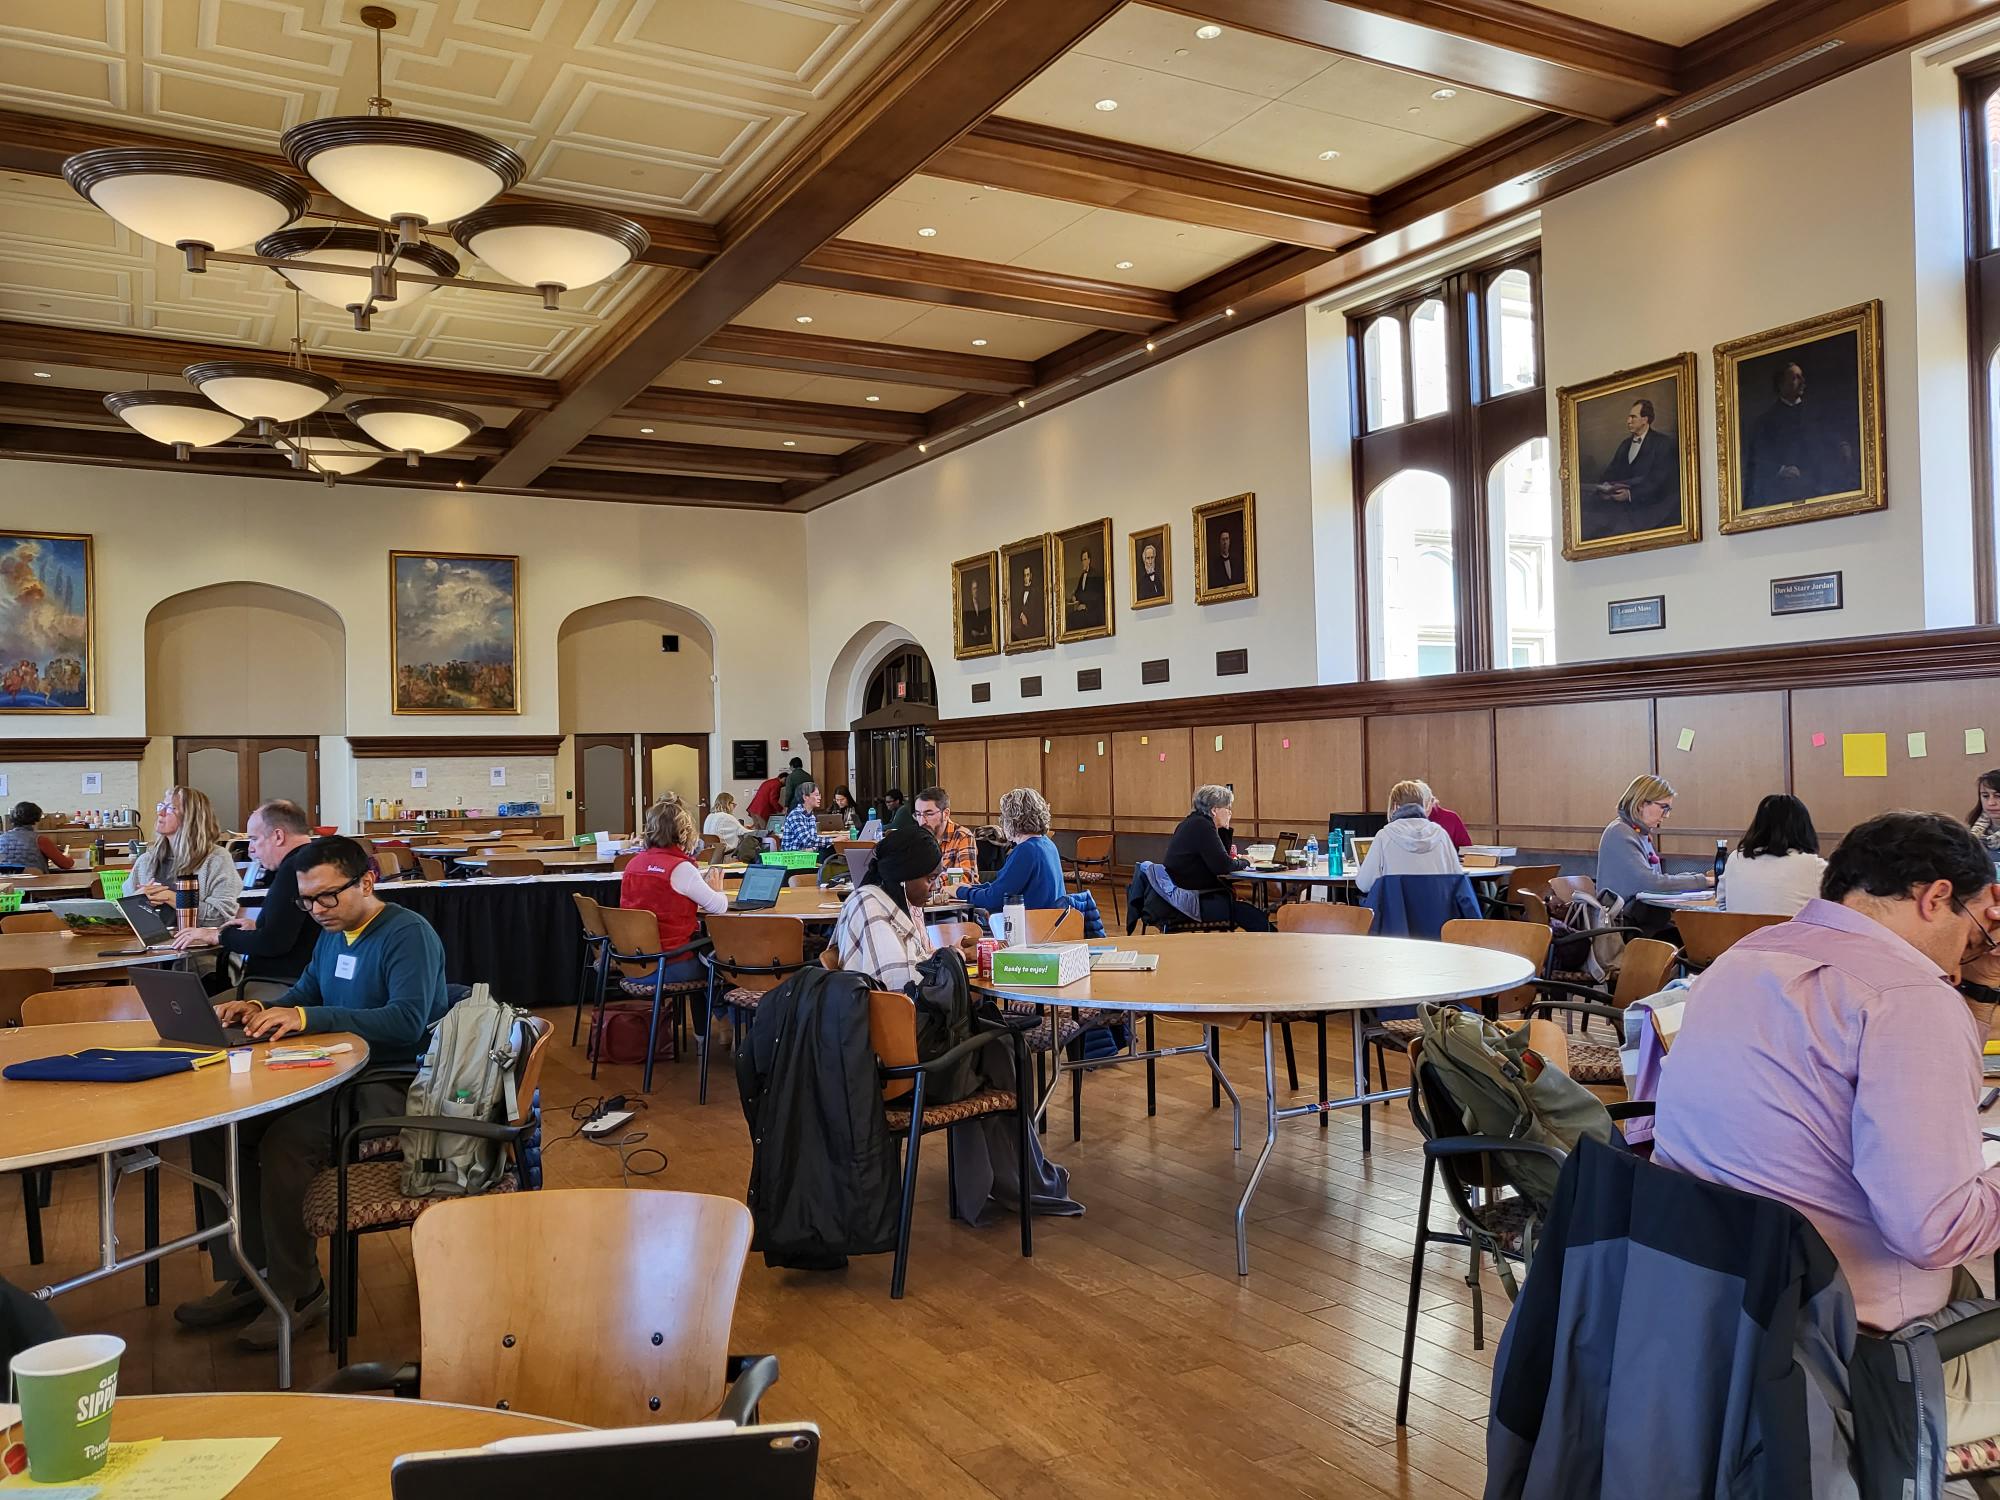 At Woodburn, several groups of people sit together at the tables in the hall. These writing groups all seem to be working on their laptops that are open in front of them. Several members are looking off into the distance, seemingly deep in thought. 